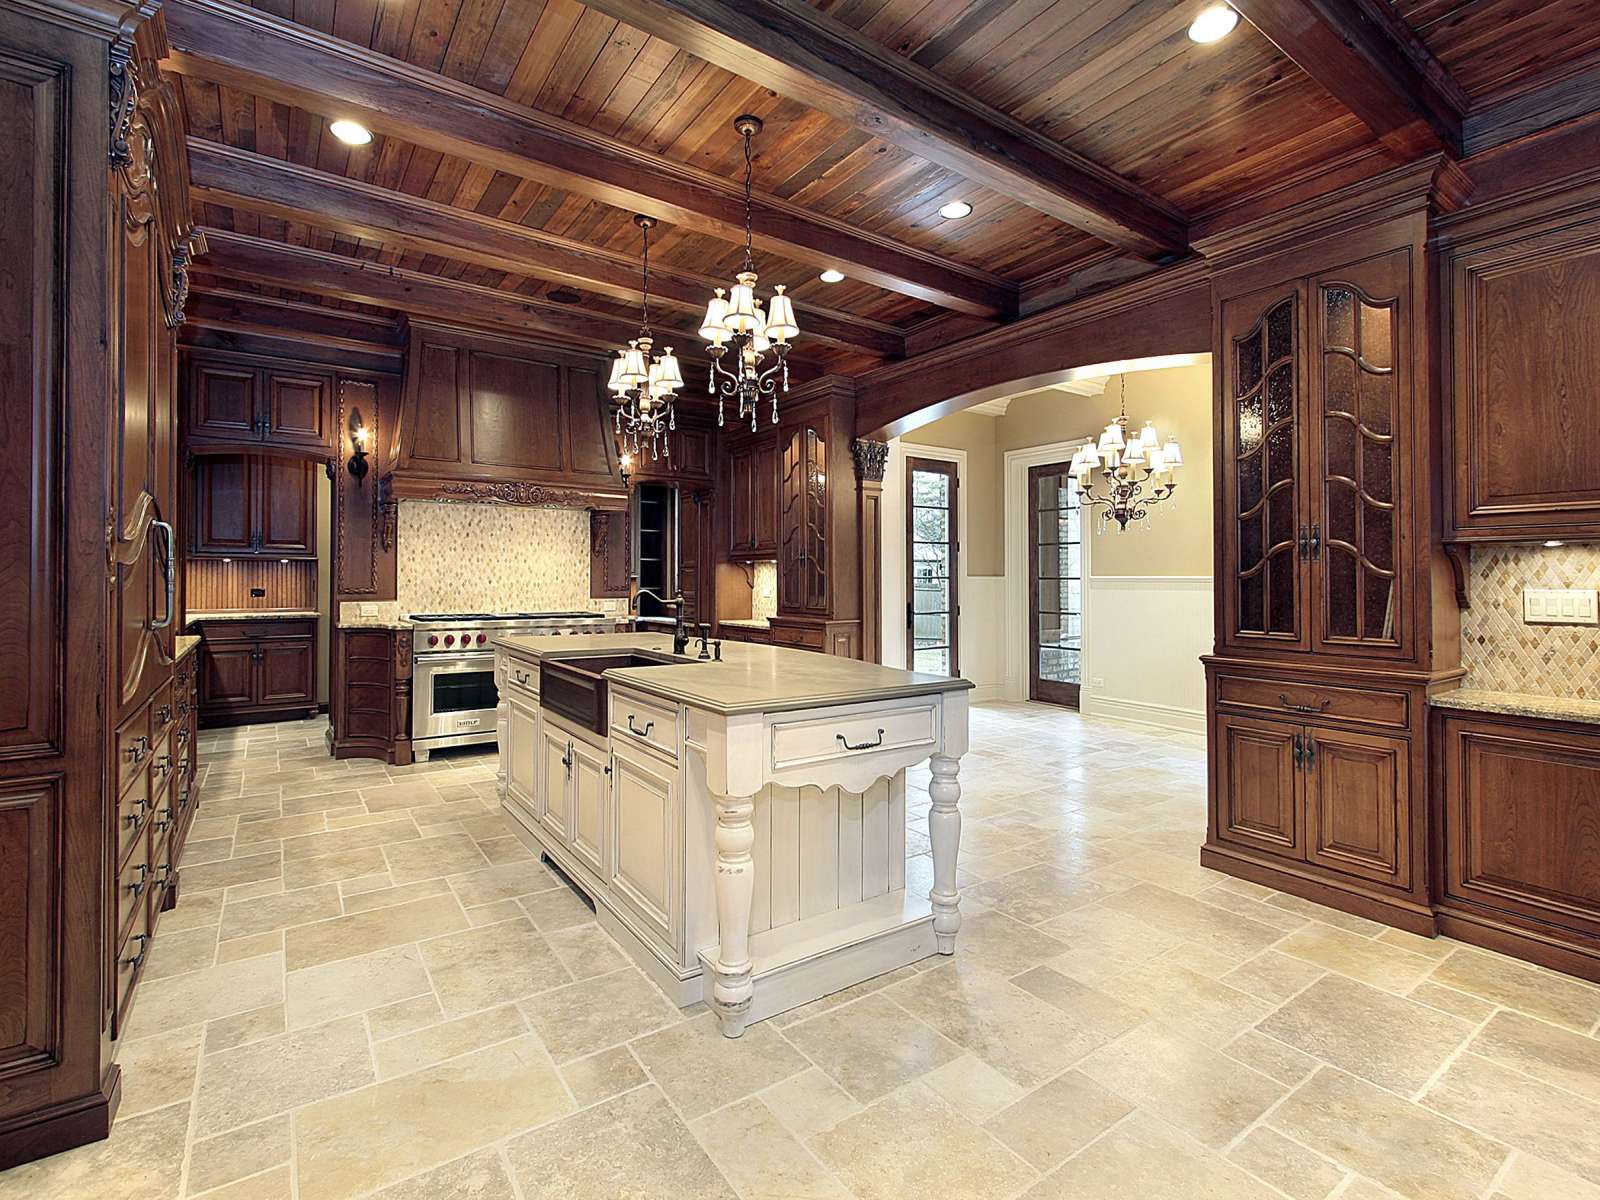 Kitchen Floor Tile Designs For A Perfect Warm Kitchen To Have